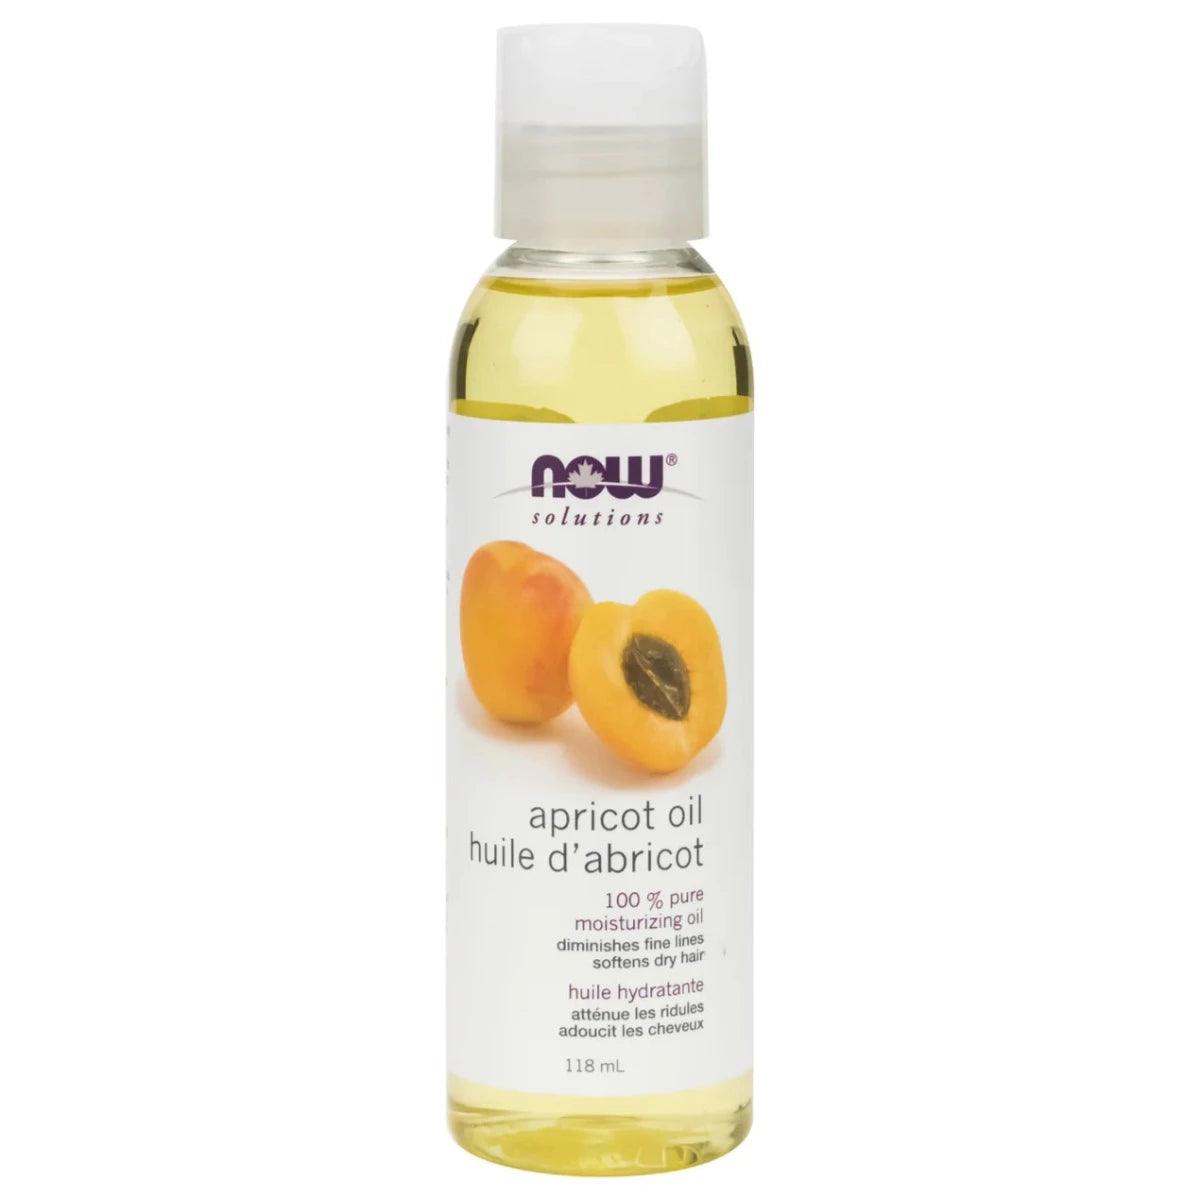 NOW Solutions Apricot Oil 100% Pure 118ML Beauty Oils at Village Vitamin Store